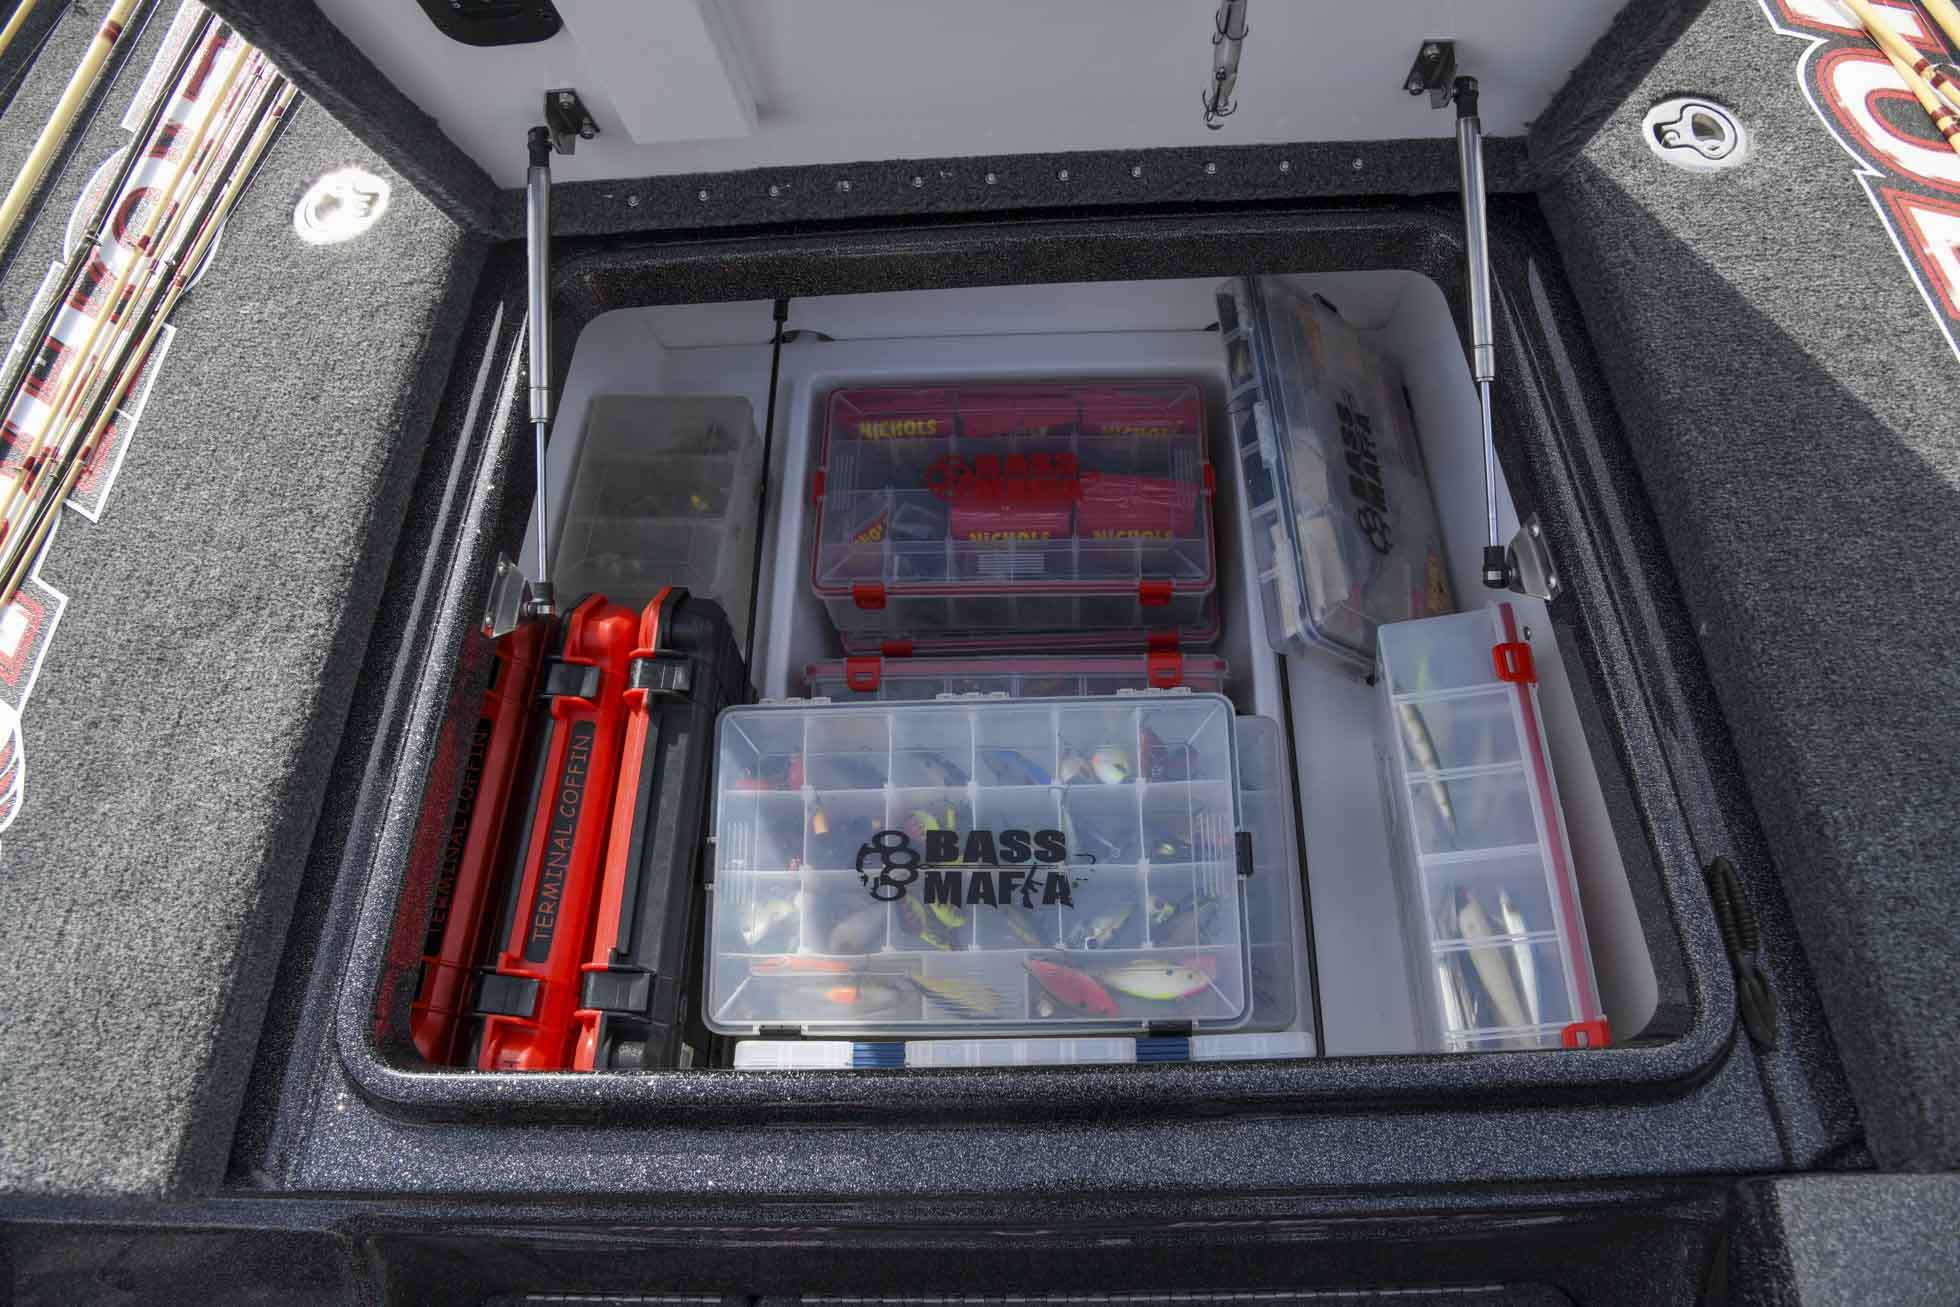  The compartment is spacious, with room for a number of boxes filled with any necessary tackle. 